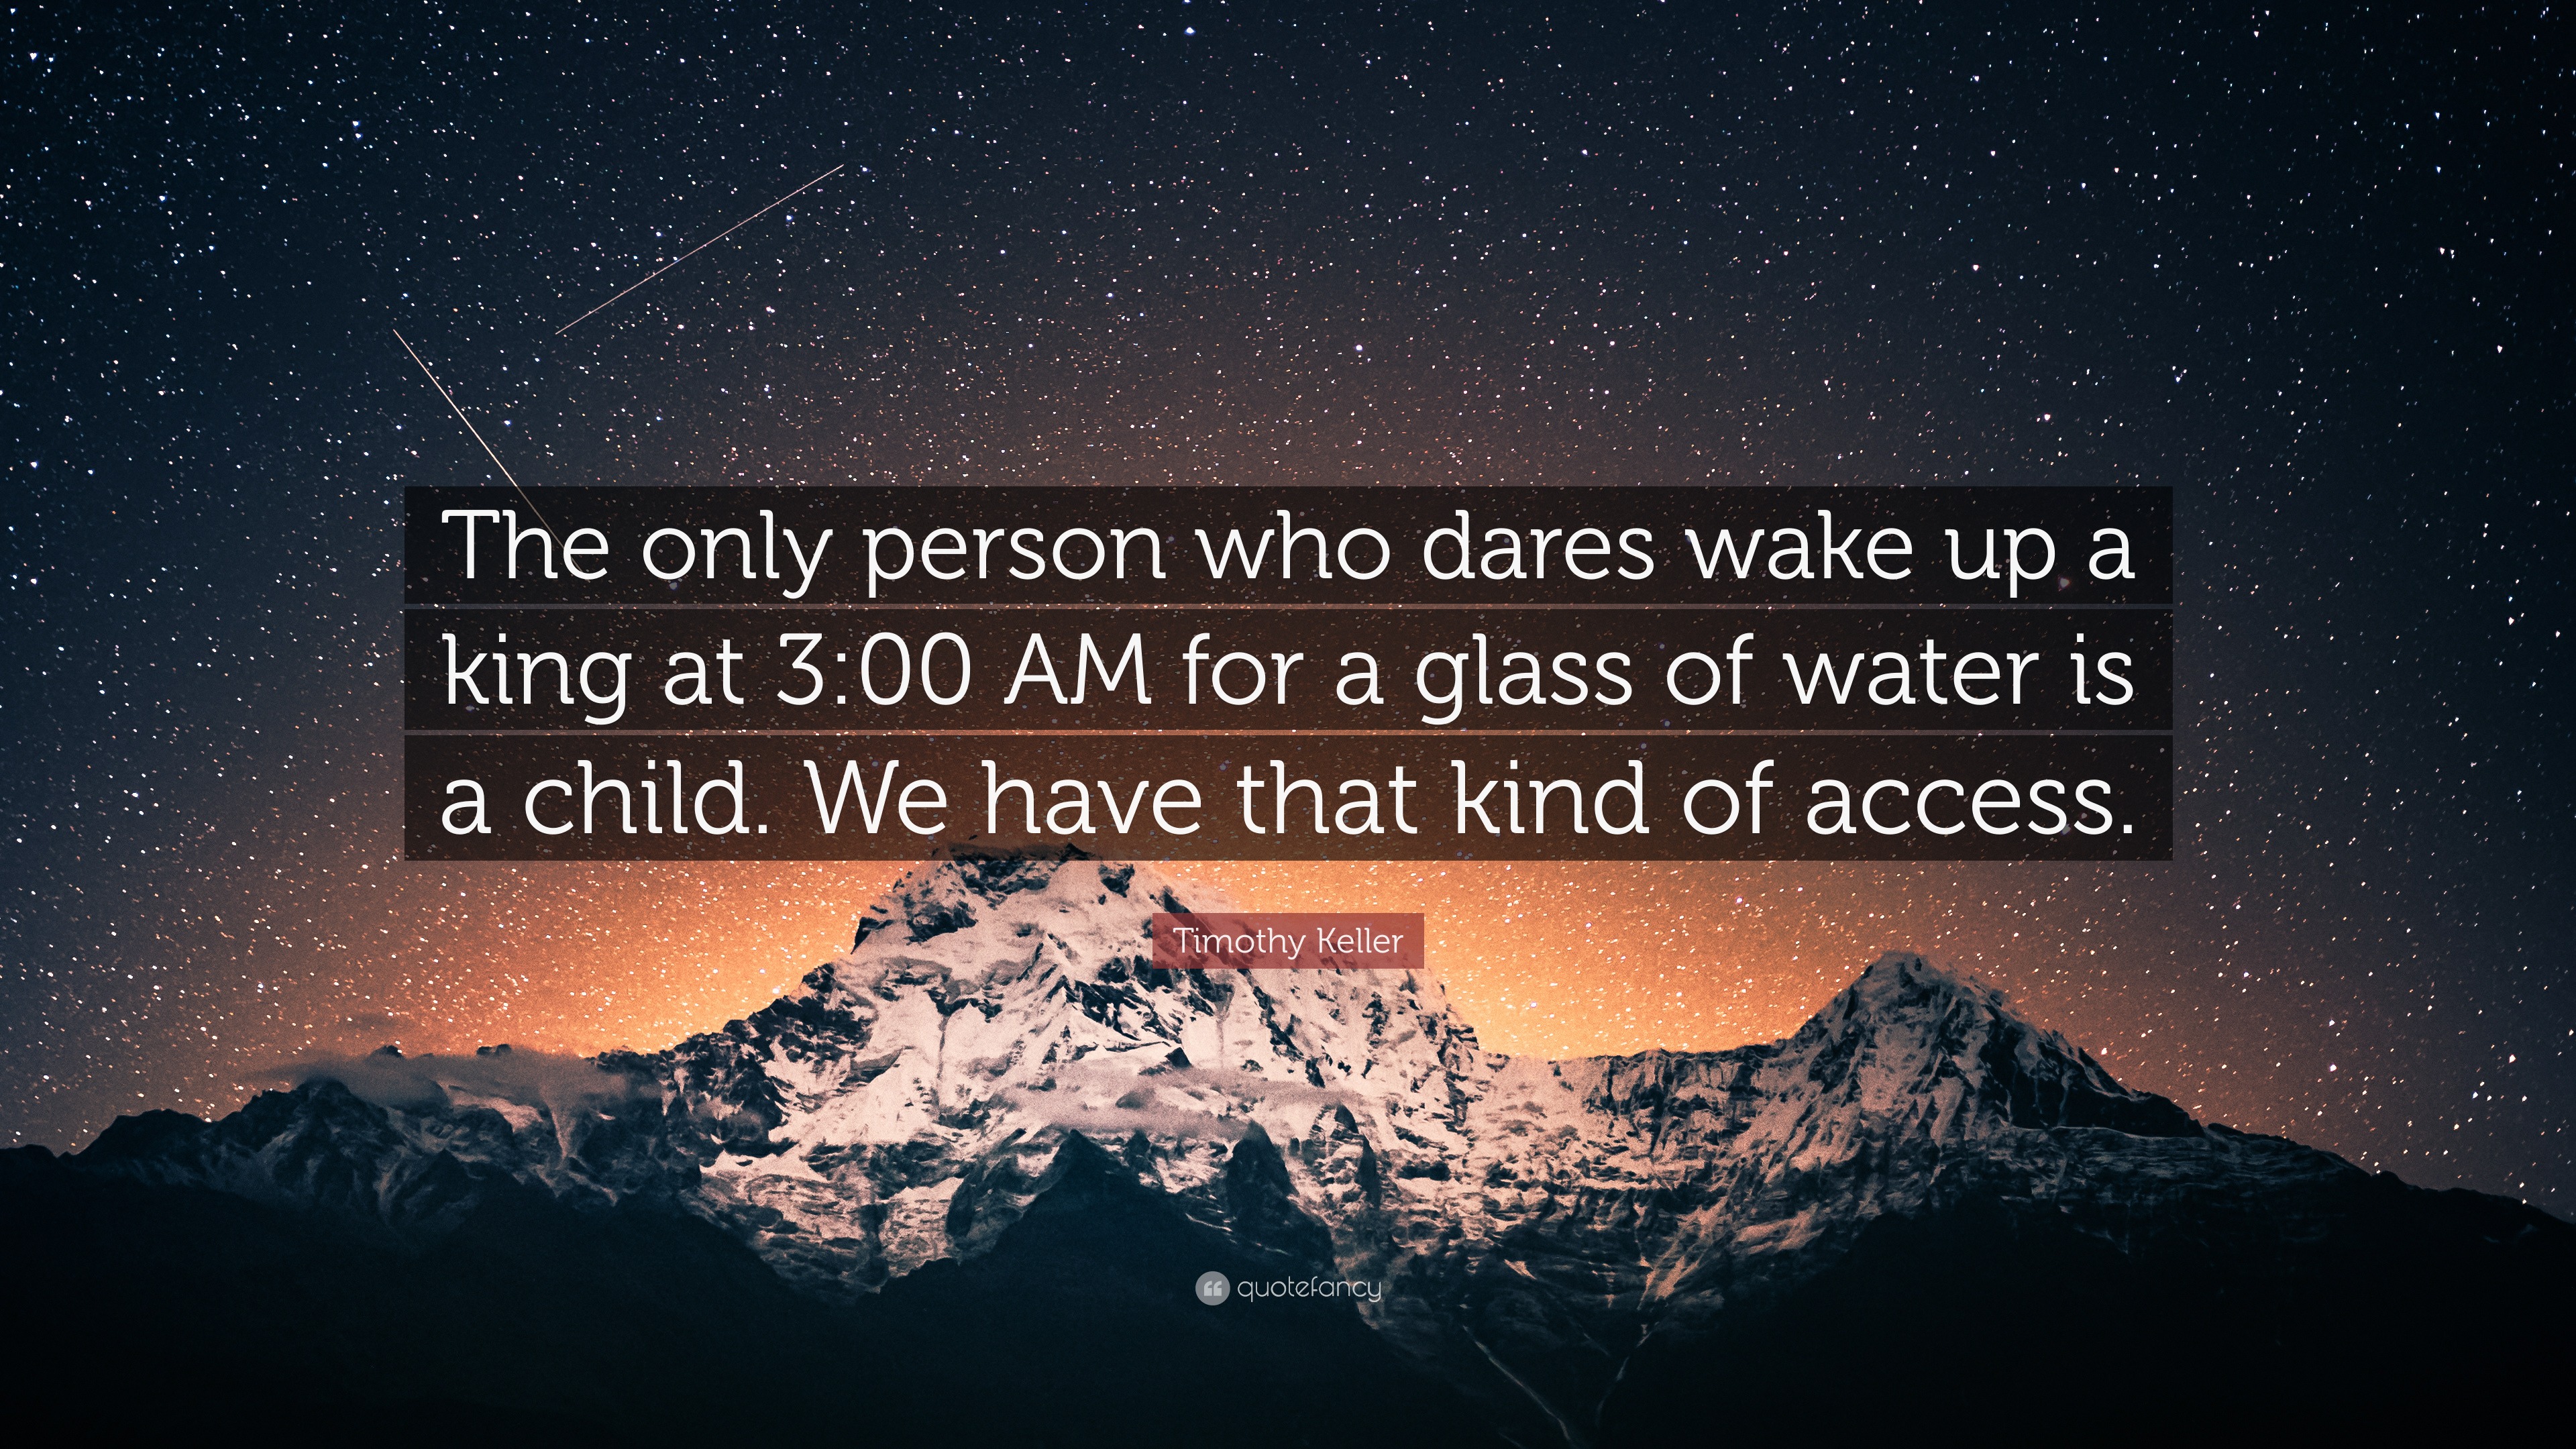 Timothy Keller Quote The Only Person Who Dares Wake Up A King At 3 00 Am